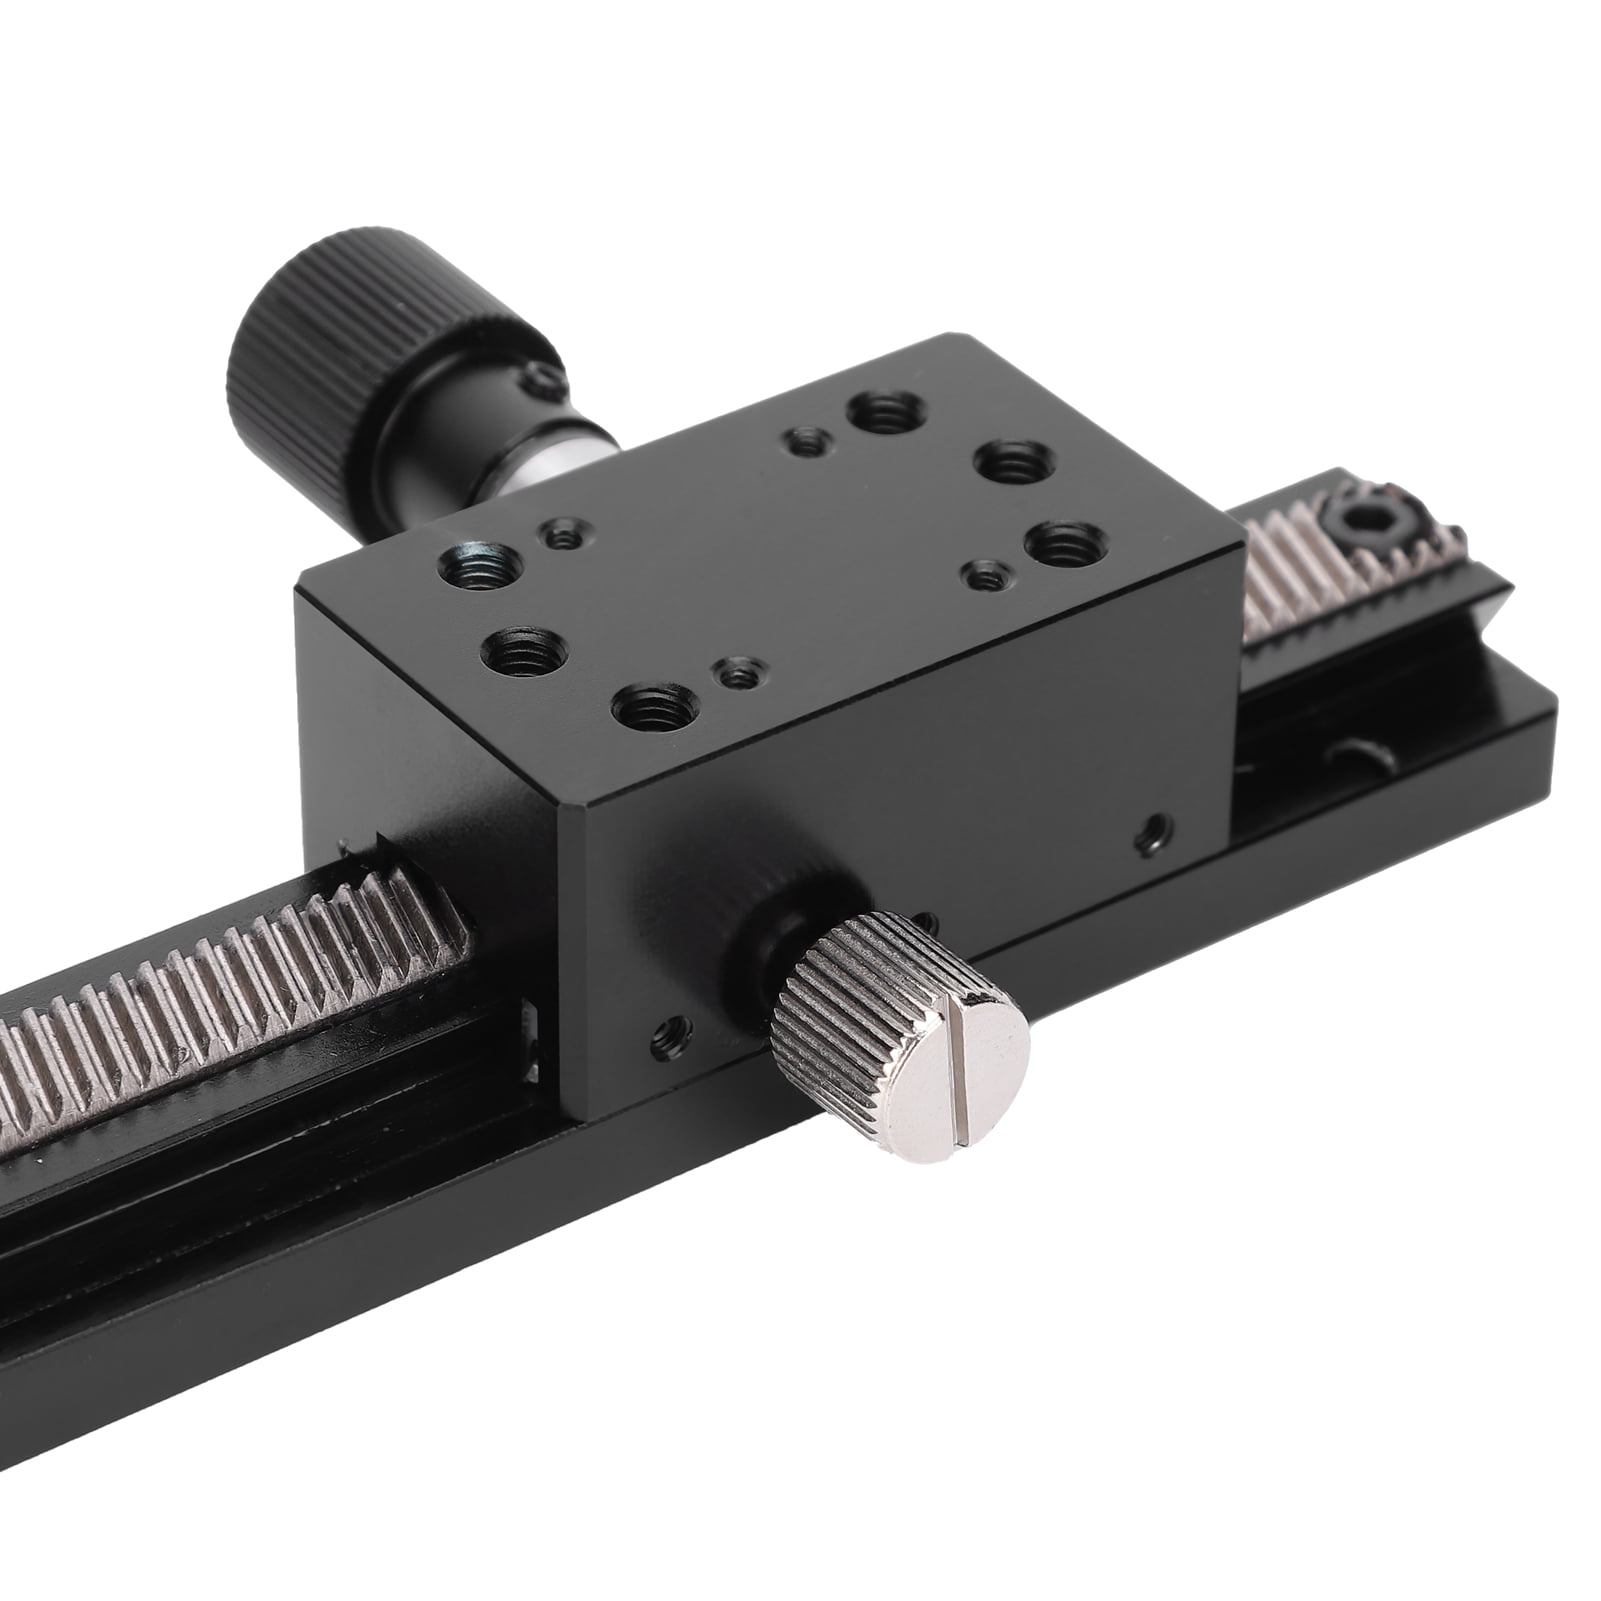 Manual Linear Stage Scratch‑Resistant Friction‑Resistant Drop‑Resistant for Industry Safety Rack Guide Manual Platform X-Axis Linear Stage